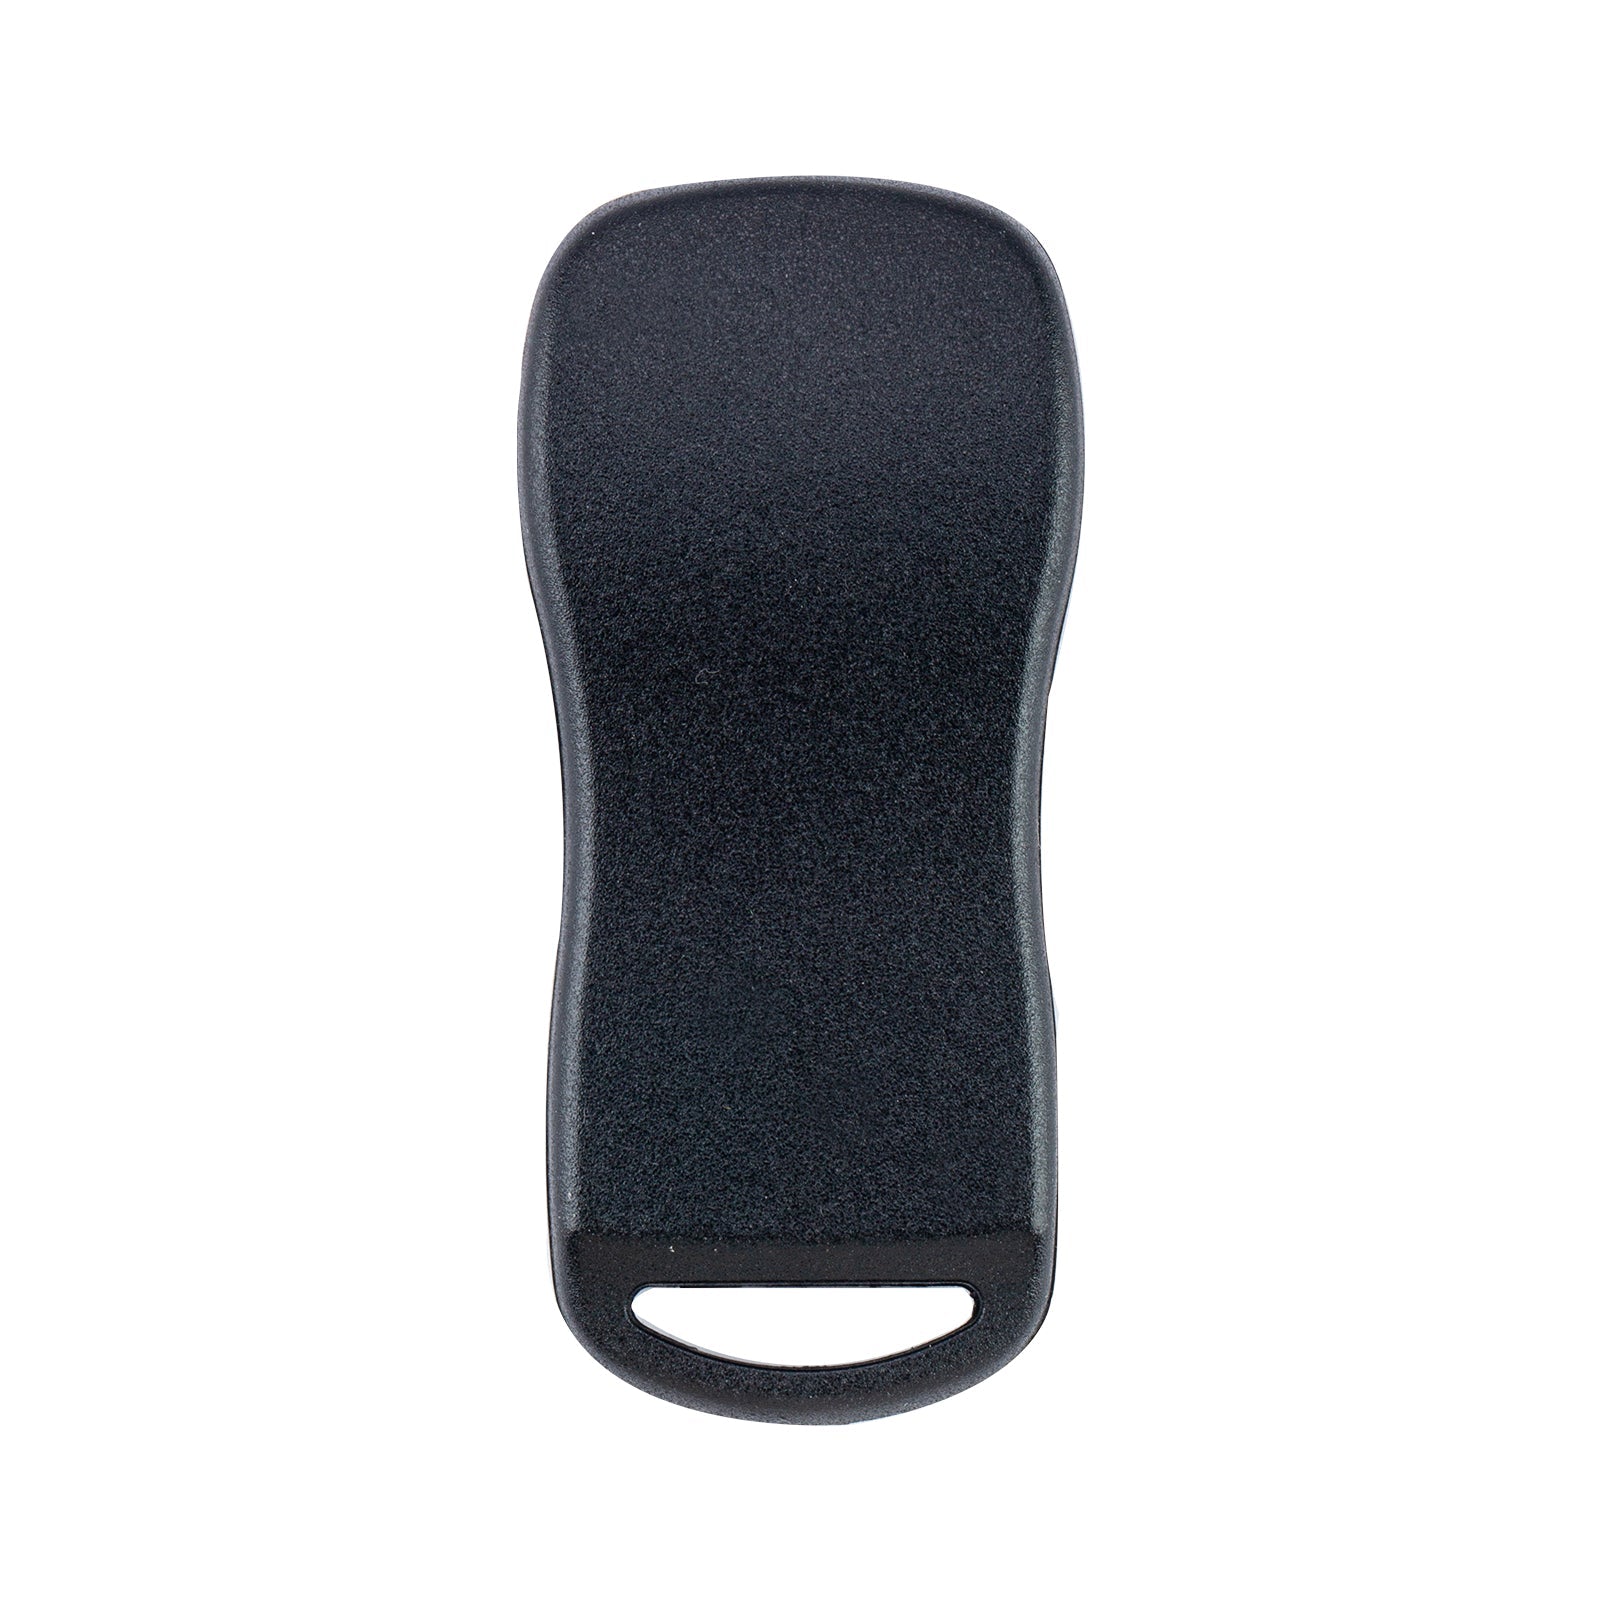 Replacement for Select Armada Murano Pathfinder Quest Titan keyless Entry Remote 3 Button KBRASTU15  KR-N3RA